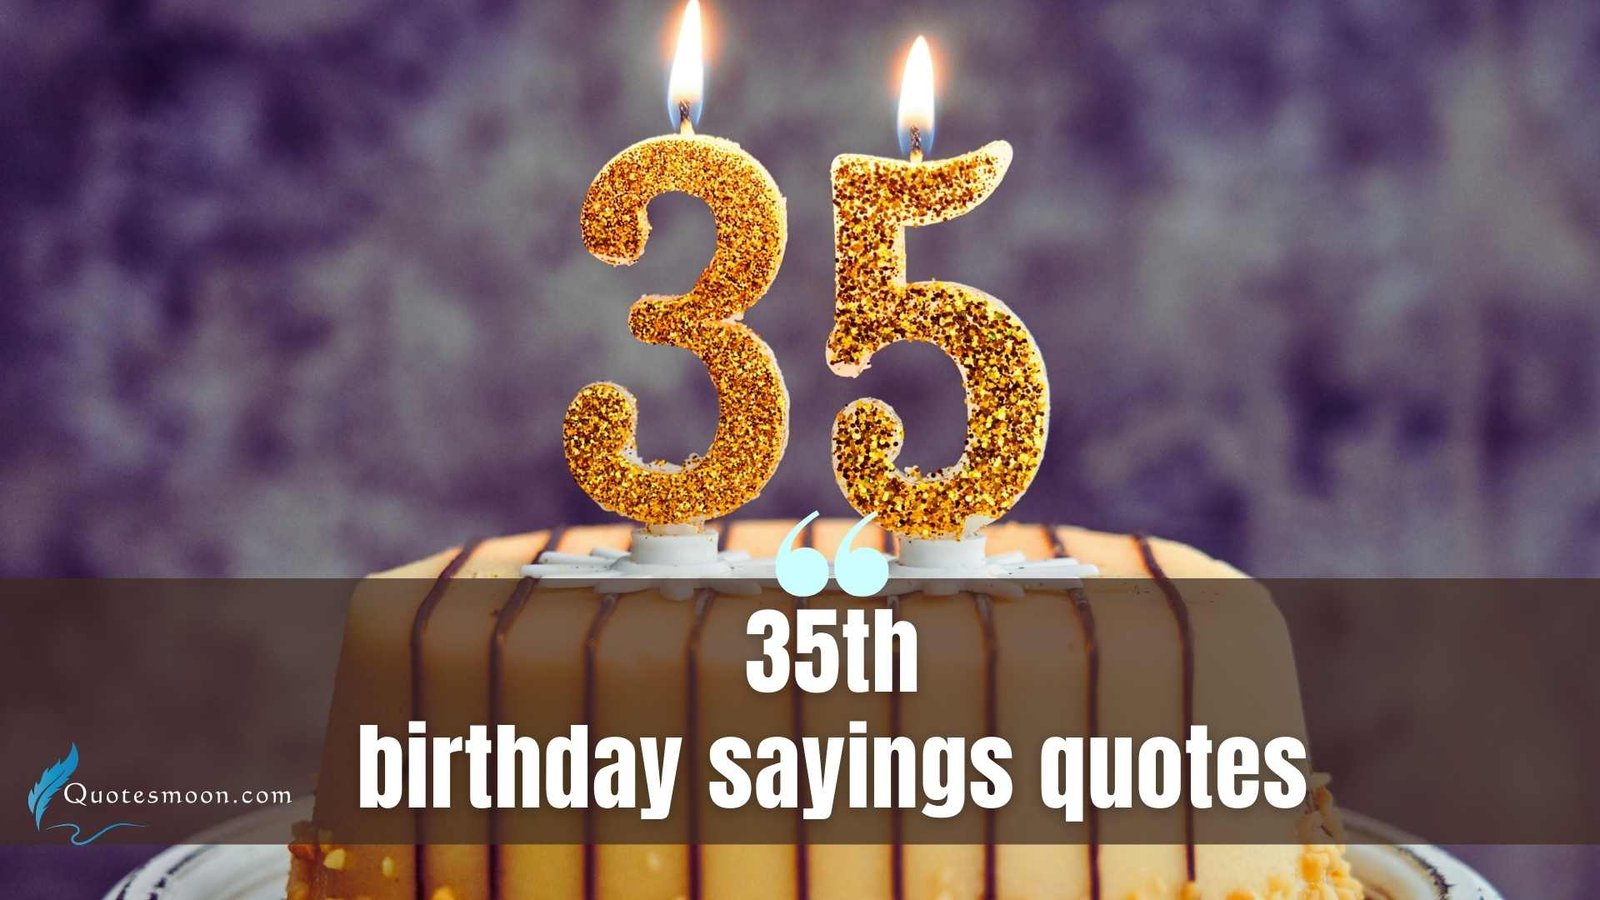 35th birthday sayings quotes images